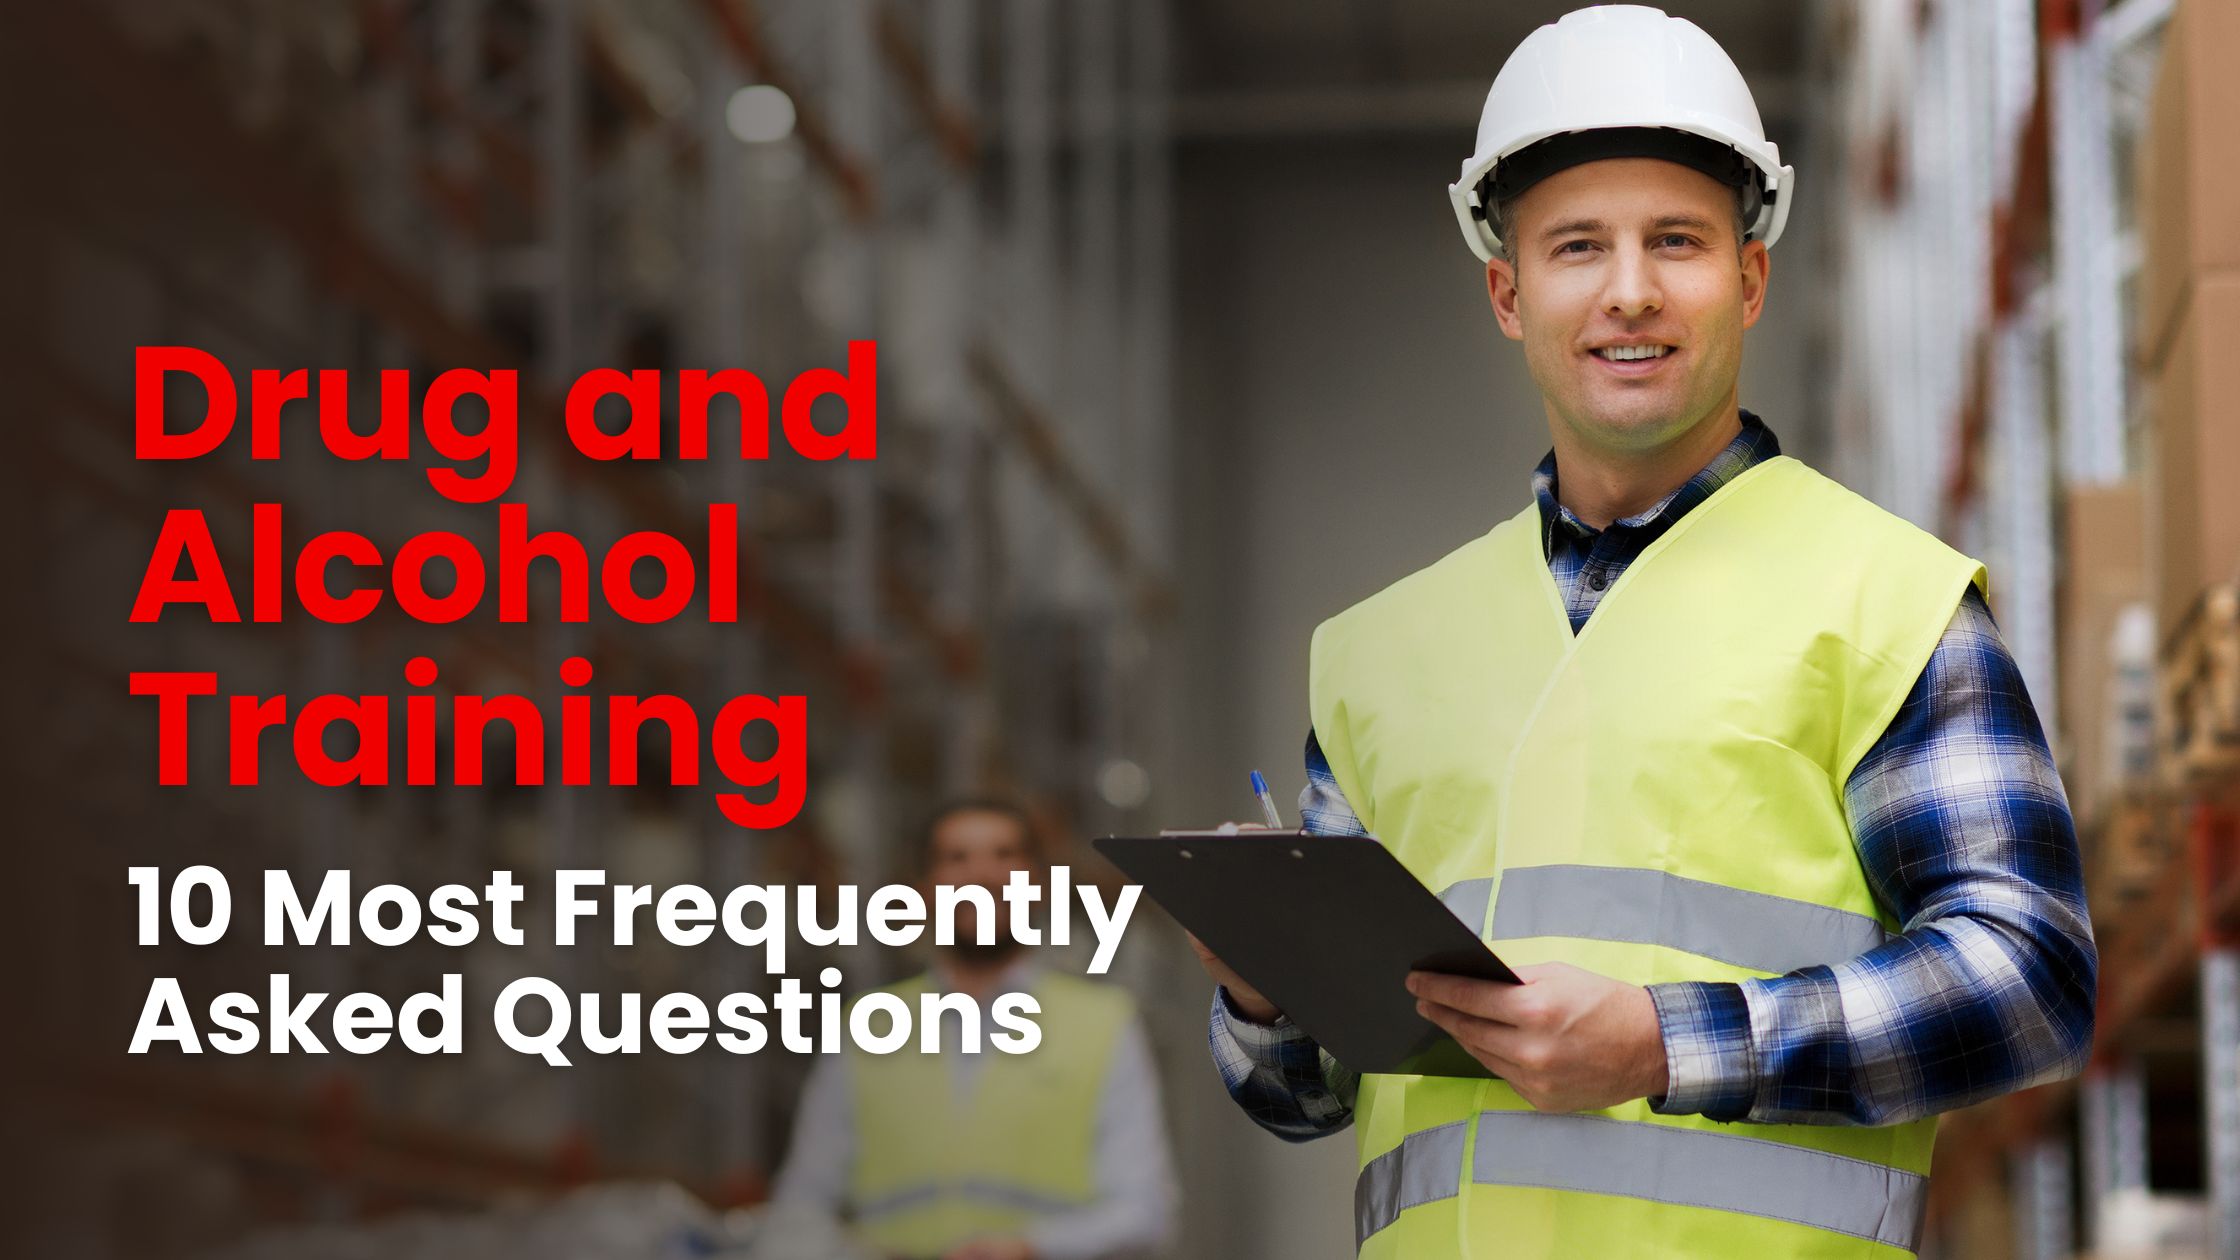 10 Most Frequently Asked Drug and Alcohol Training FAQs